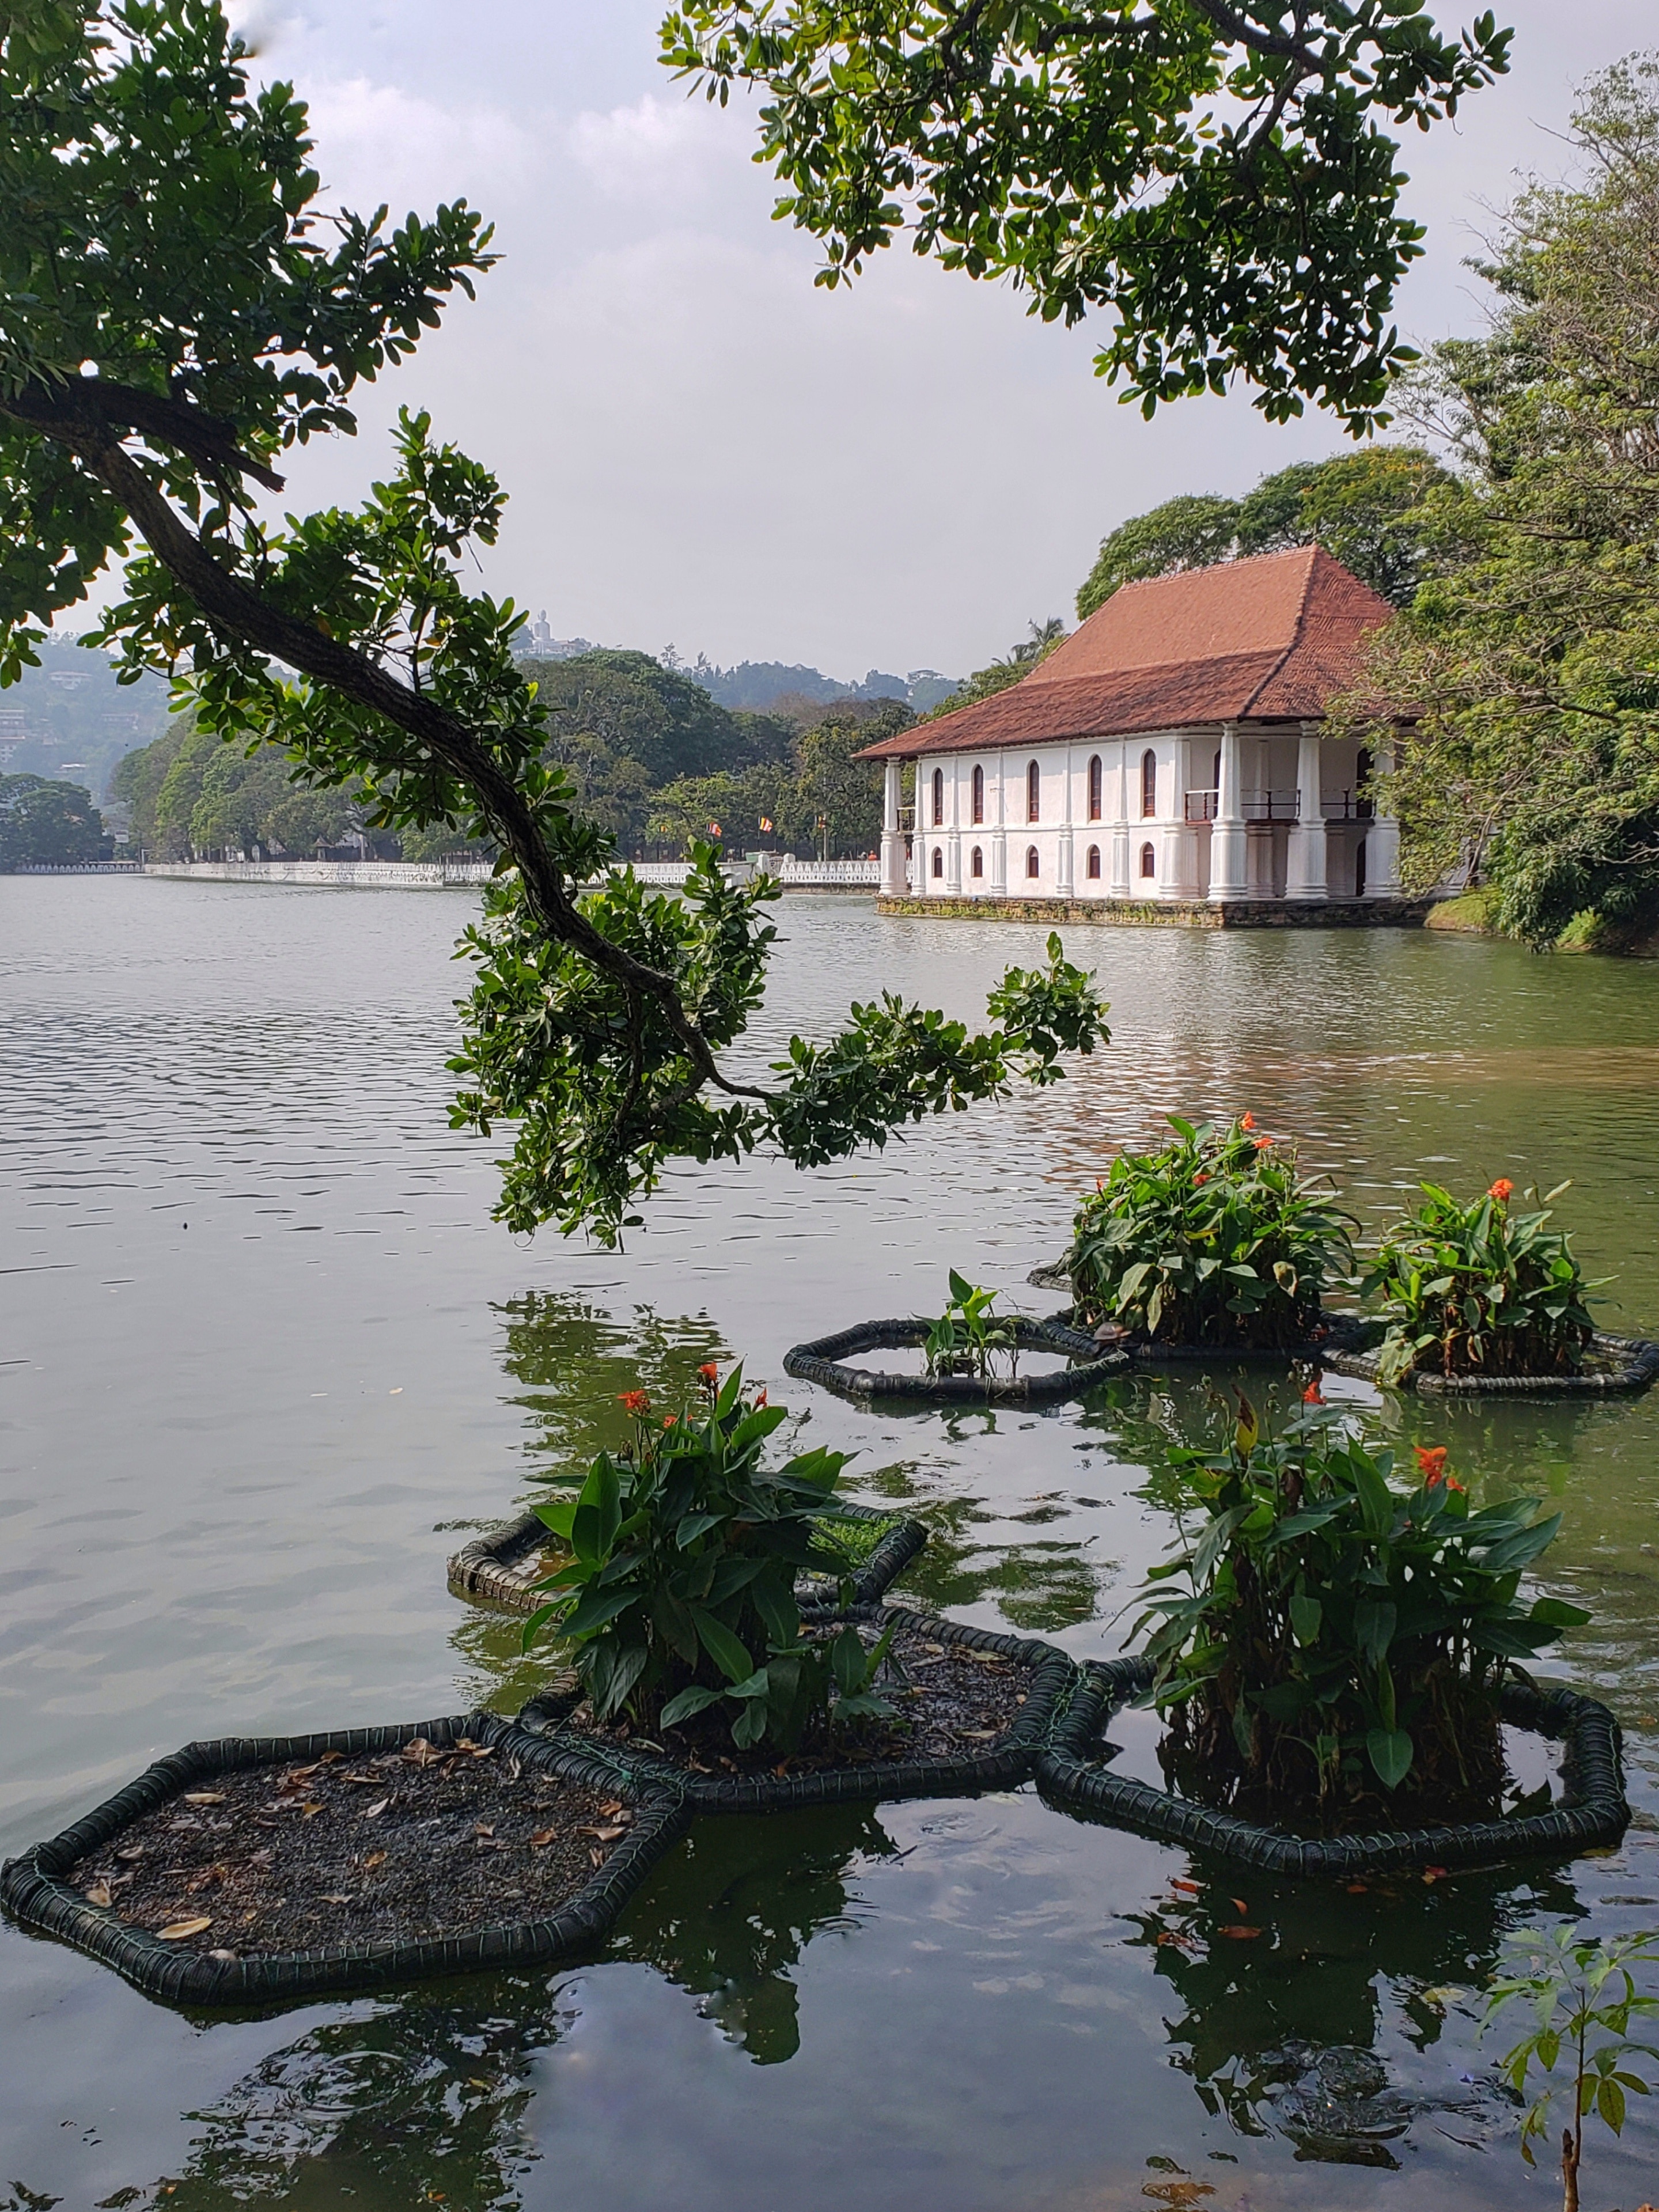 Two reasons to come to Kandy: 1, to walk around this lake, and 2, to visit the temple with the sacred tooth relic